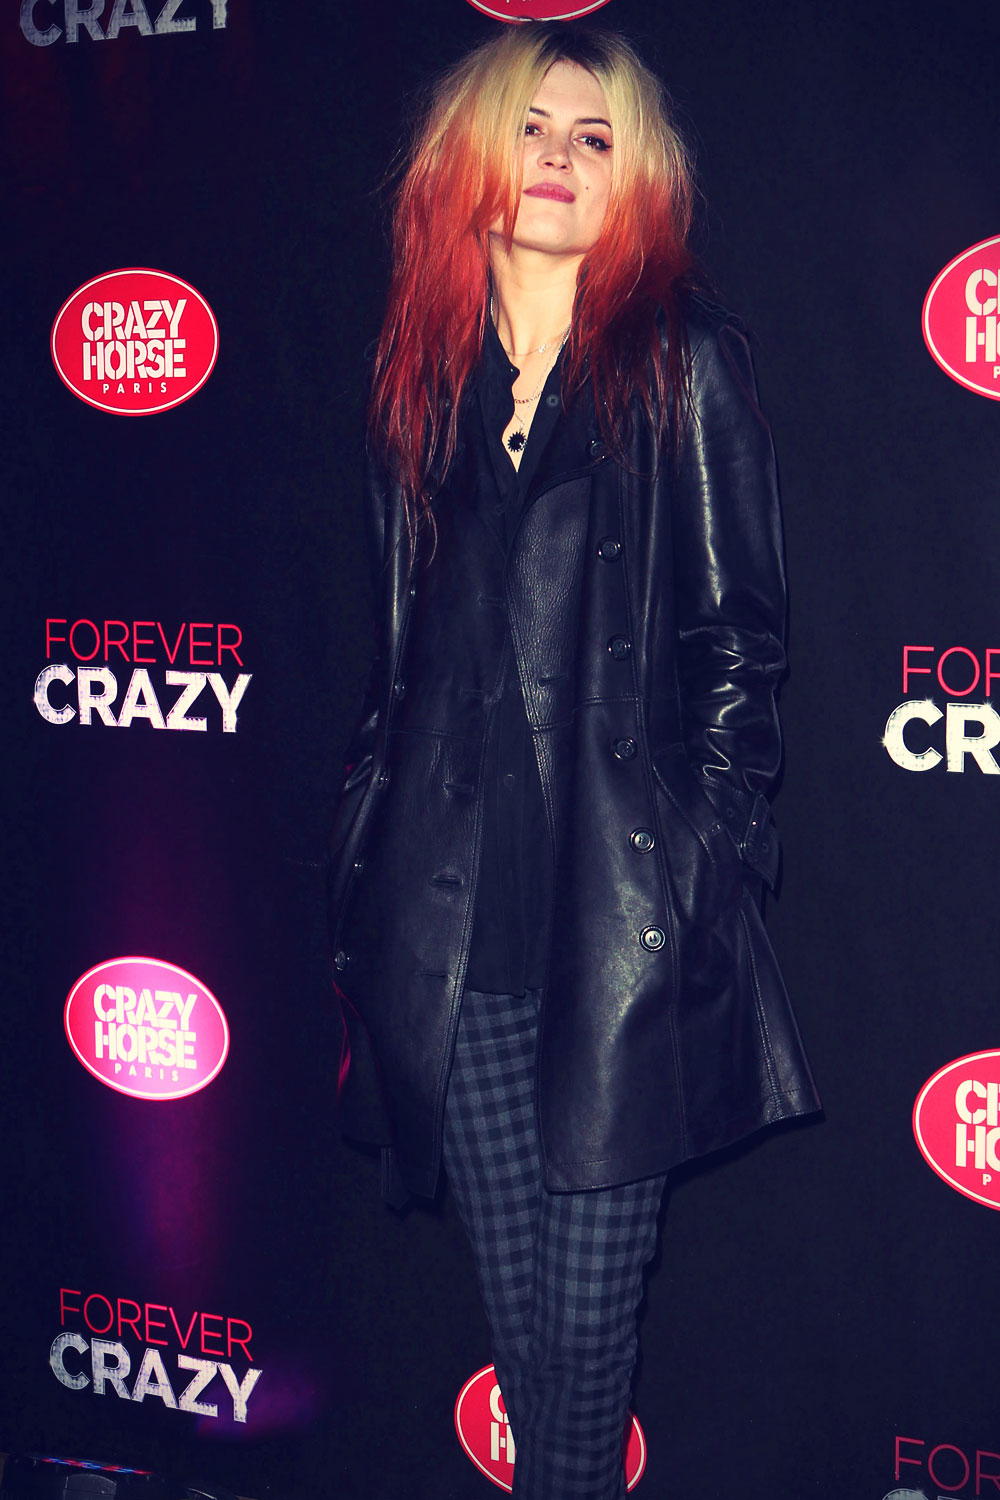 Alison Mosshart at Premiere of Crazy Horse